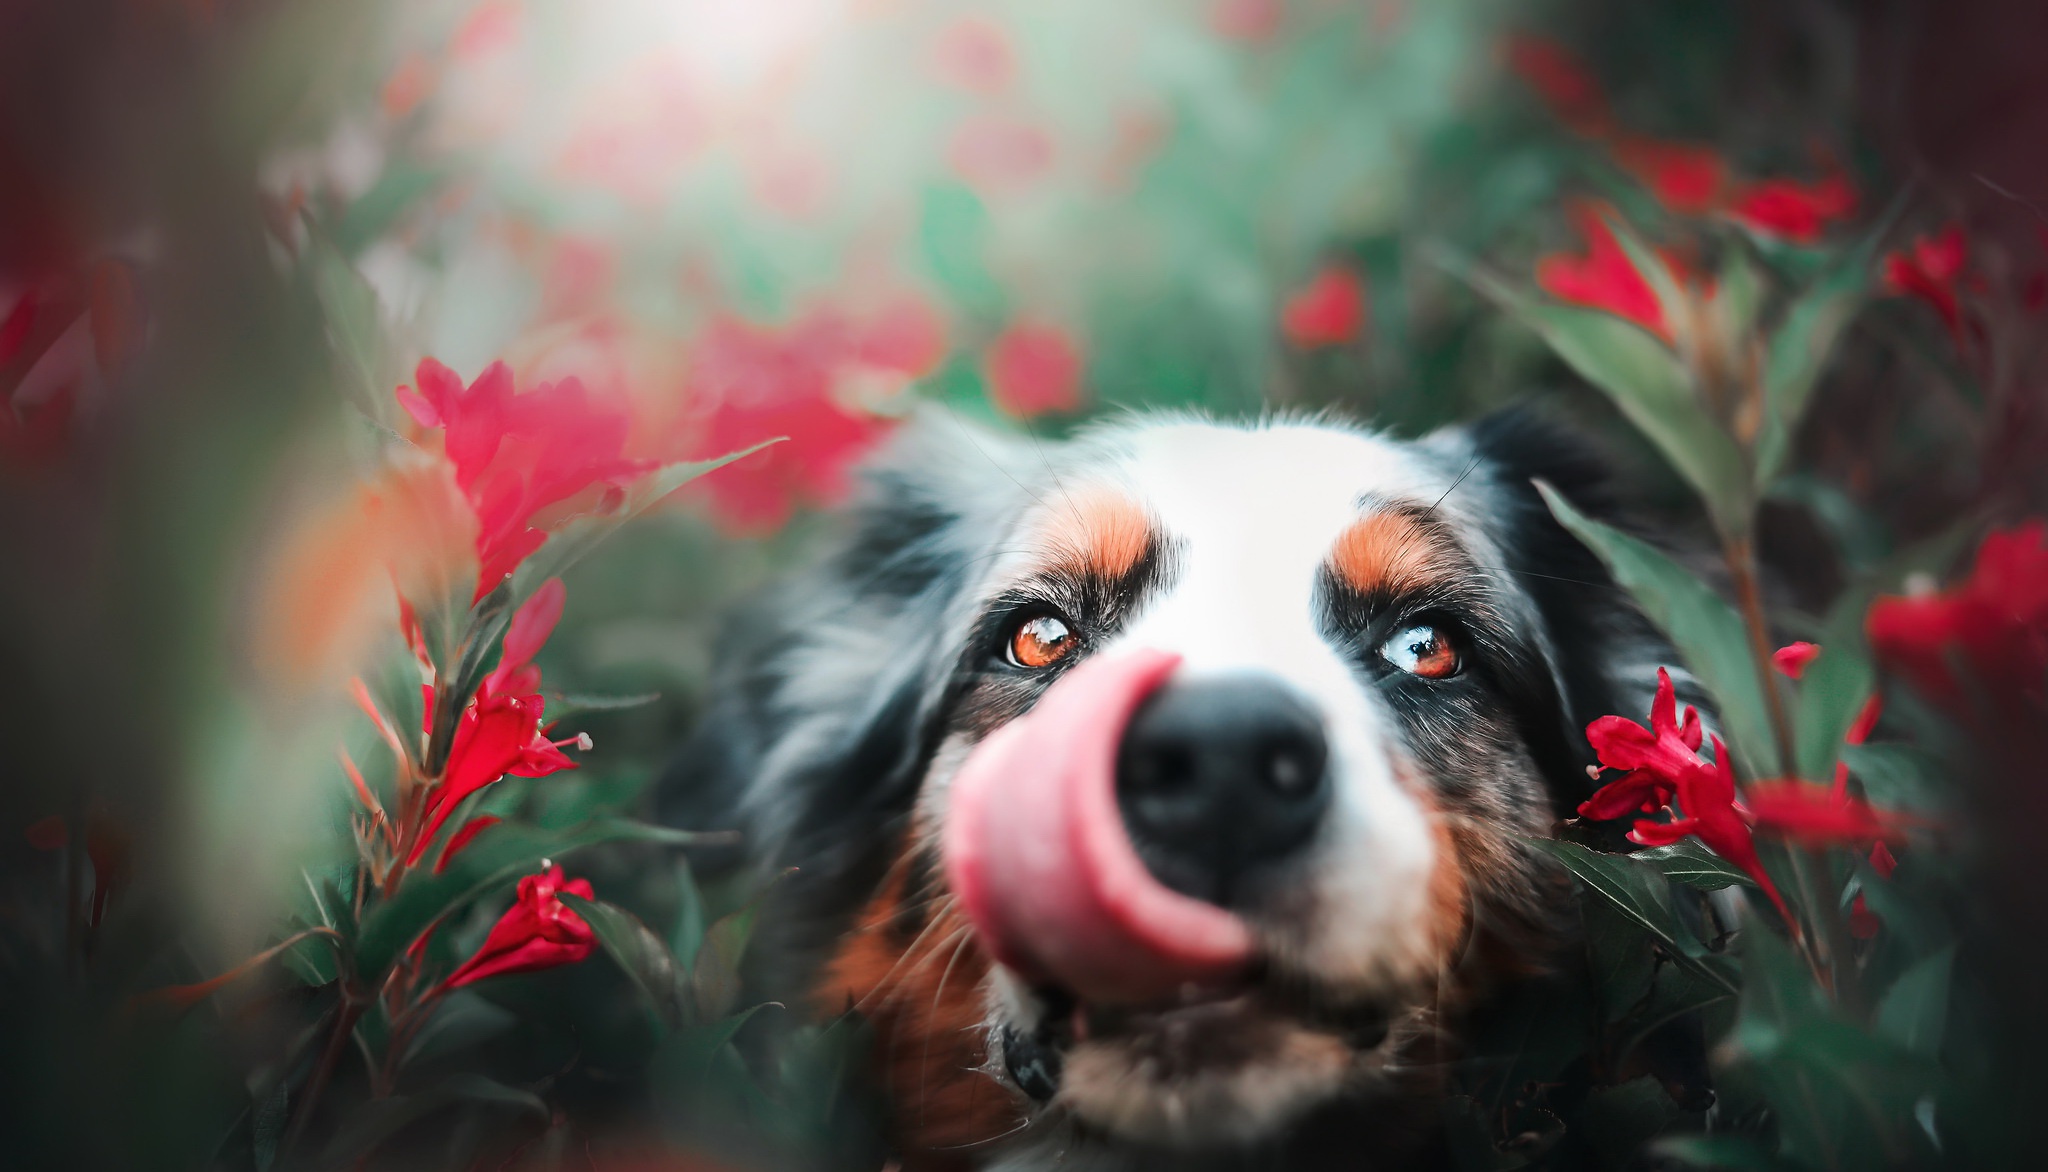 General 2048x1172 blurred red tongues dog animals plants